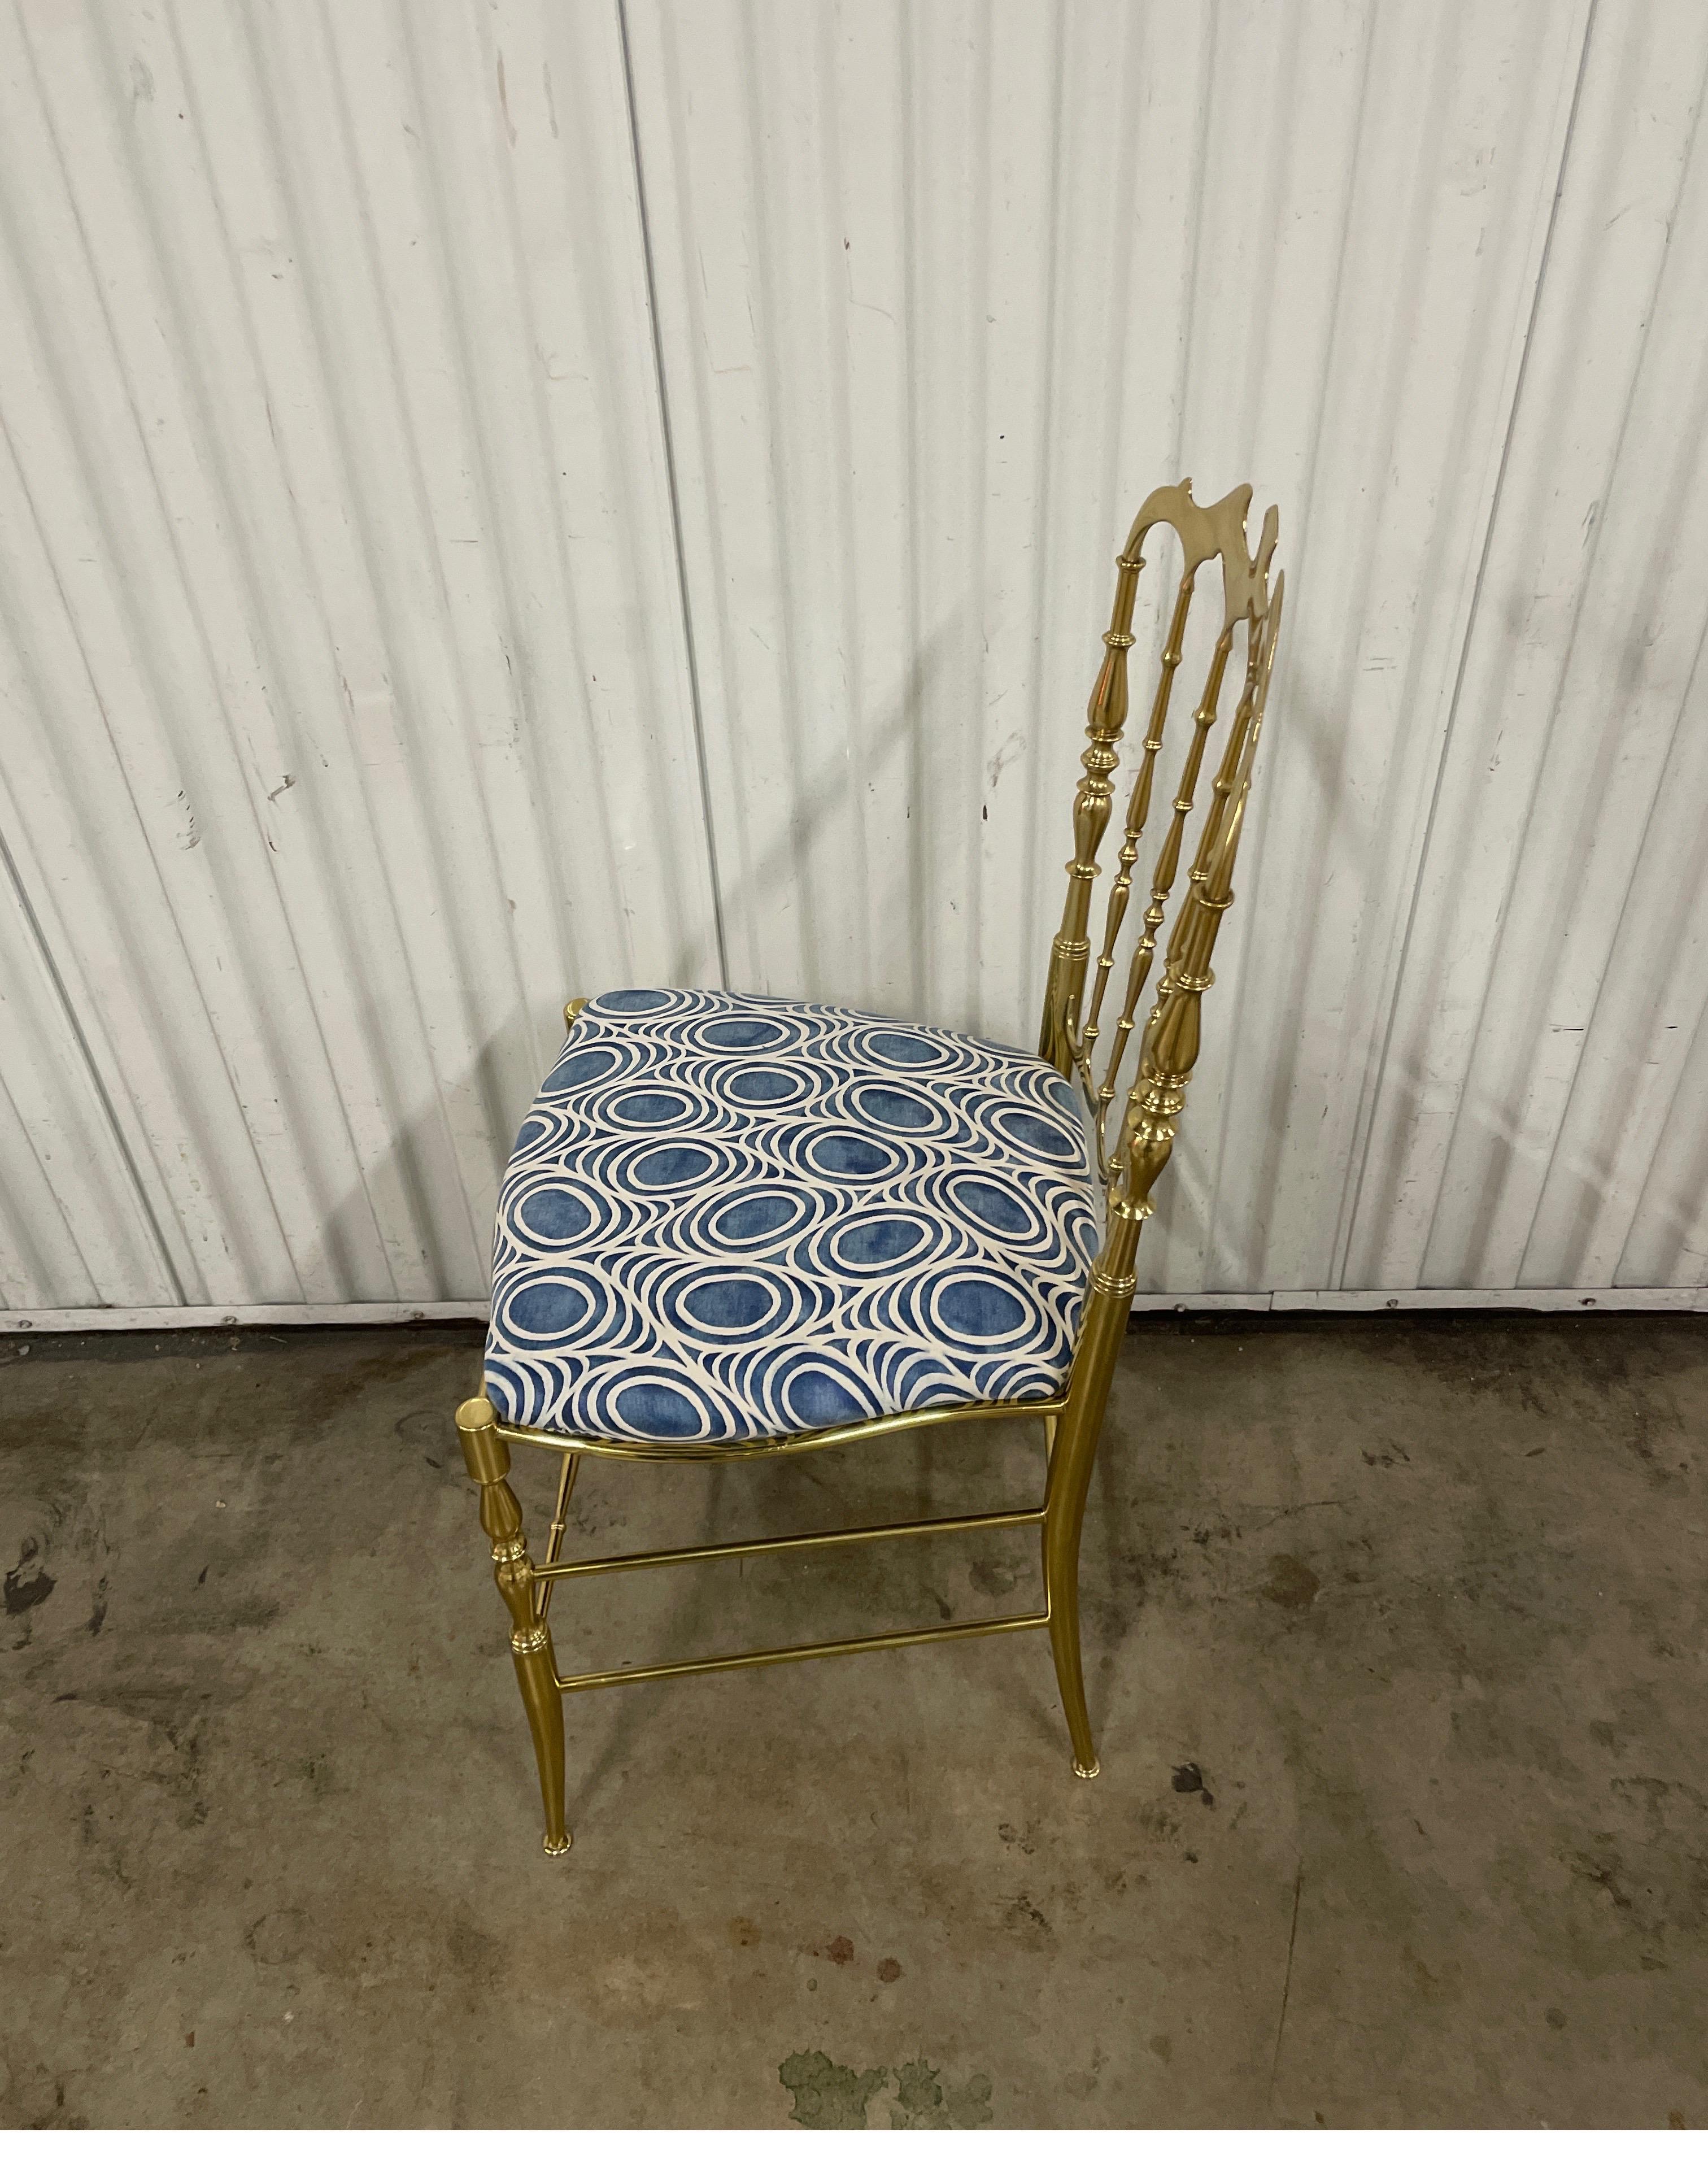 Vintage Solid Brass Italian Chiavari Chair with Fortuny Seat Covering In Good Condition For Sale In West Palm Beach, FL